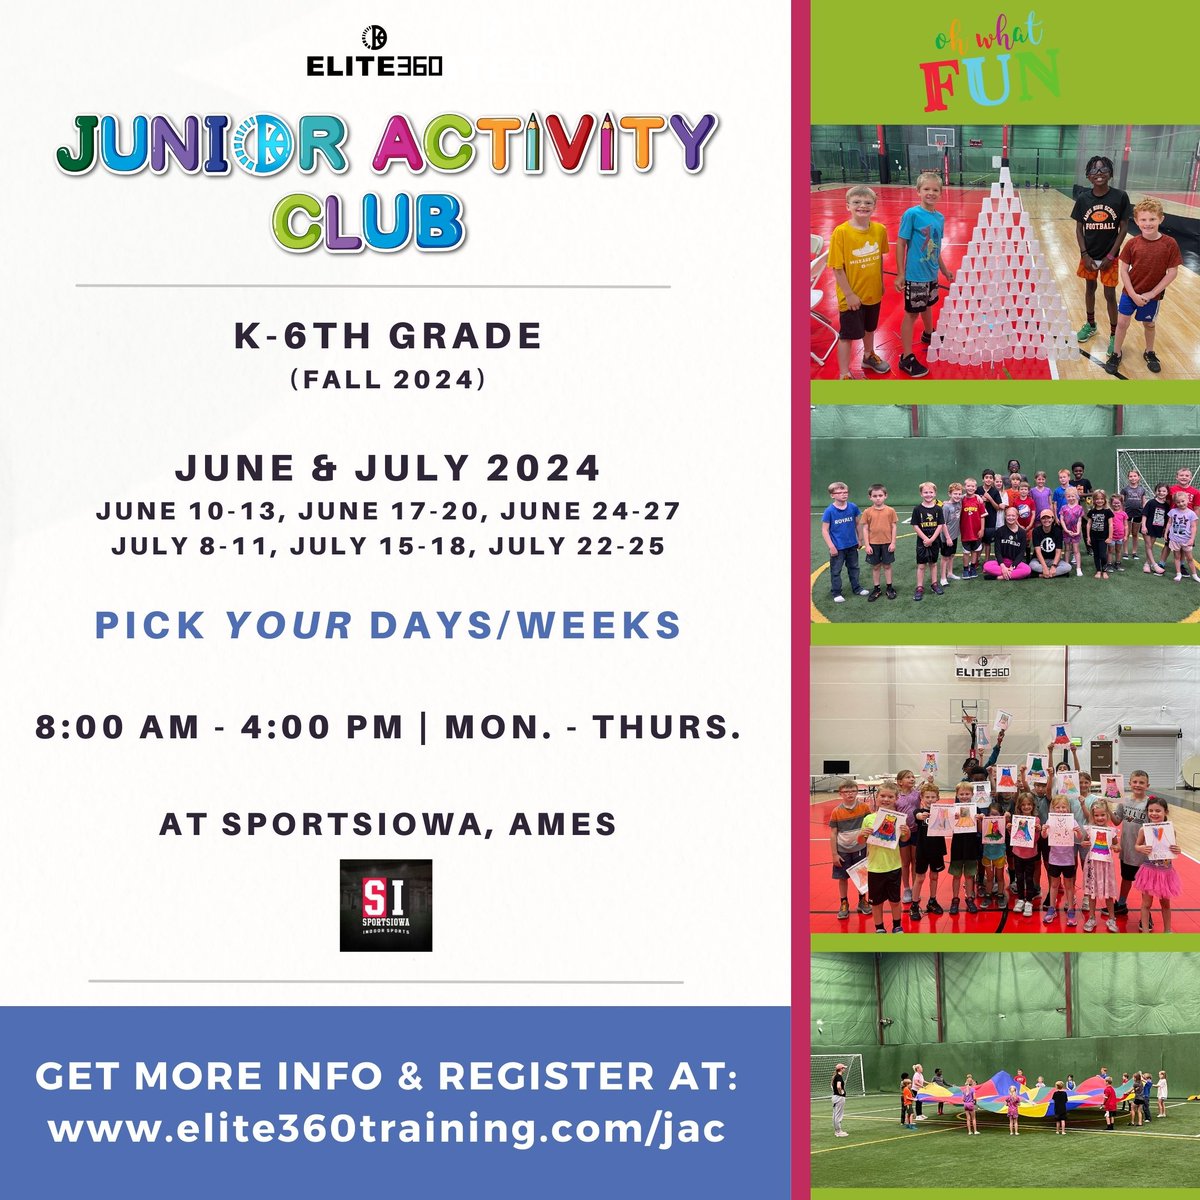 Junior Activity Club is a camp for K-6th grade kids to be active, meet new friends & have fun in the summer! ...and they might just go home tired. 😃 Sign up for full weeks, single days, or even half days. Get all the info at elite360training.com/jac